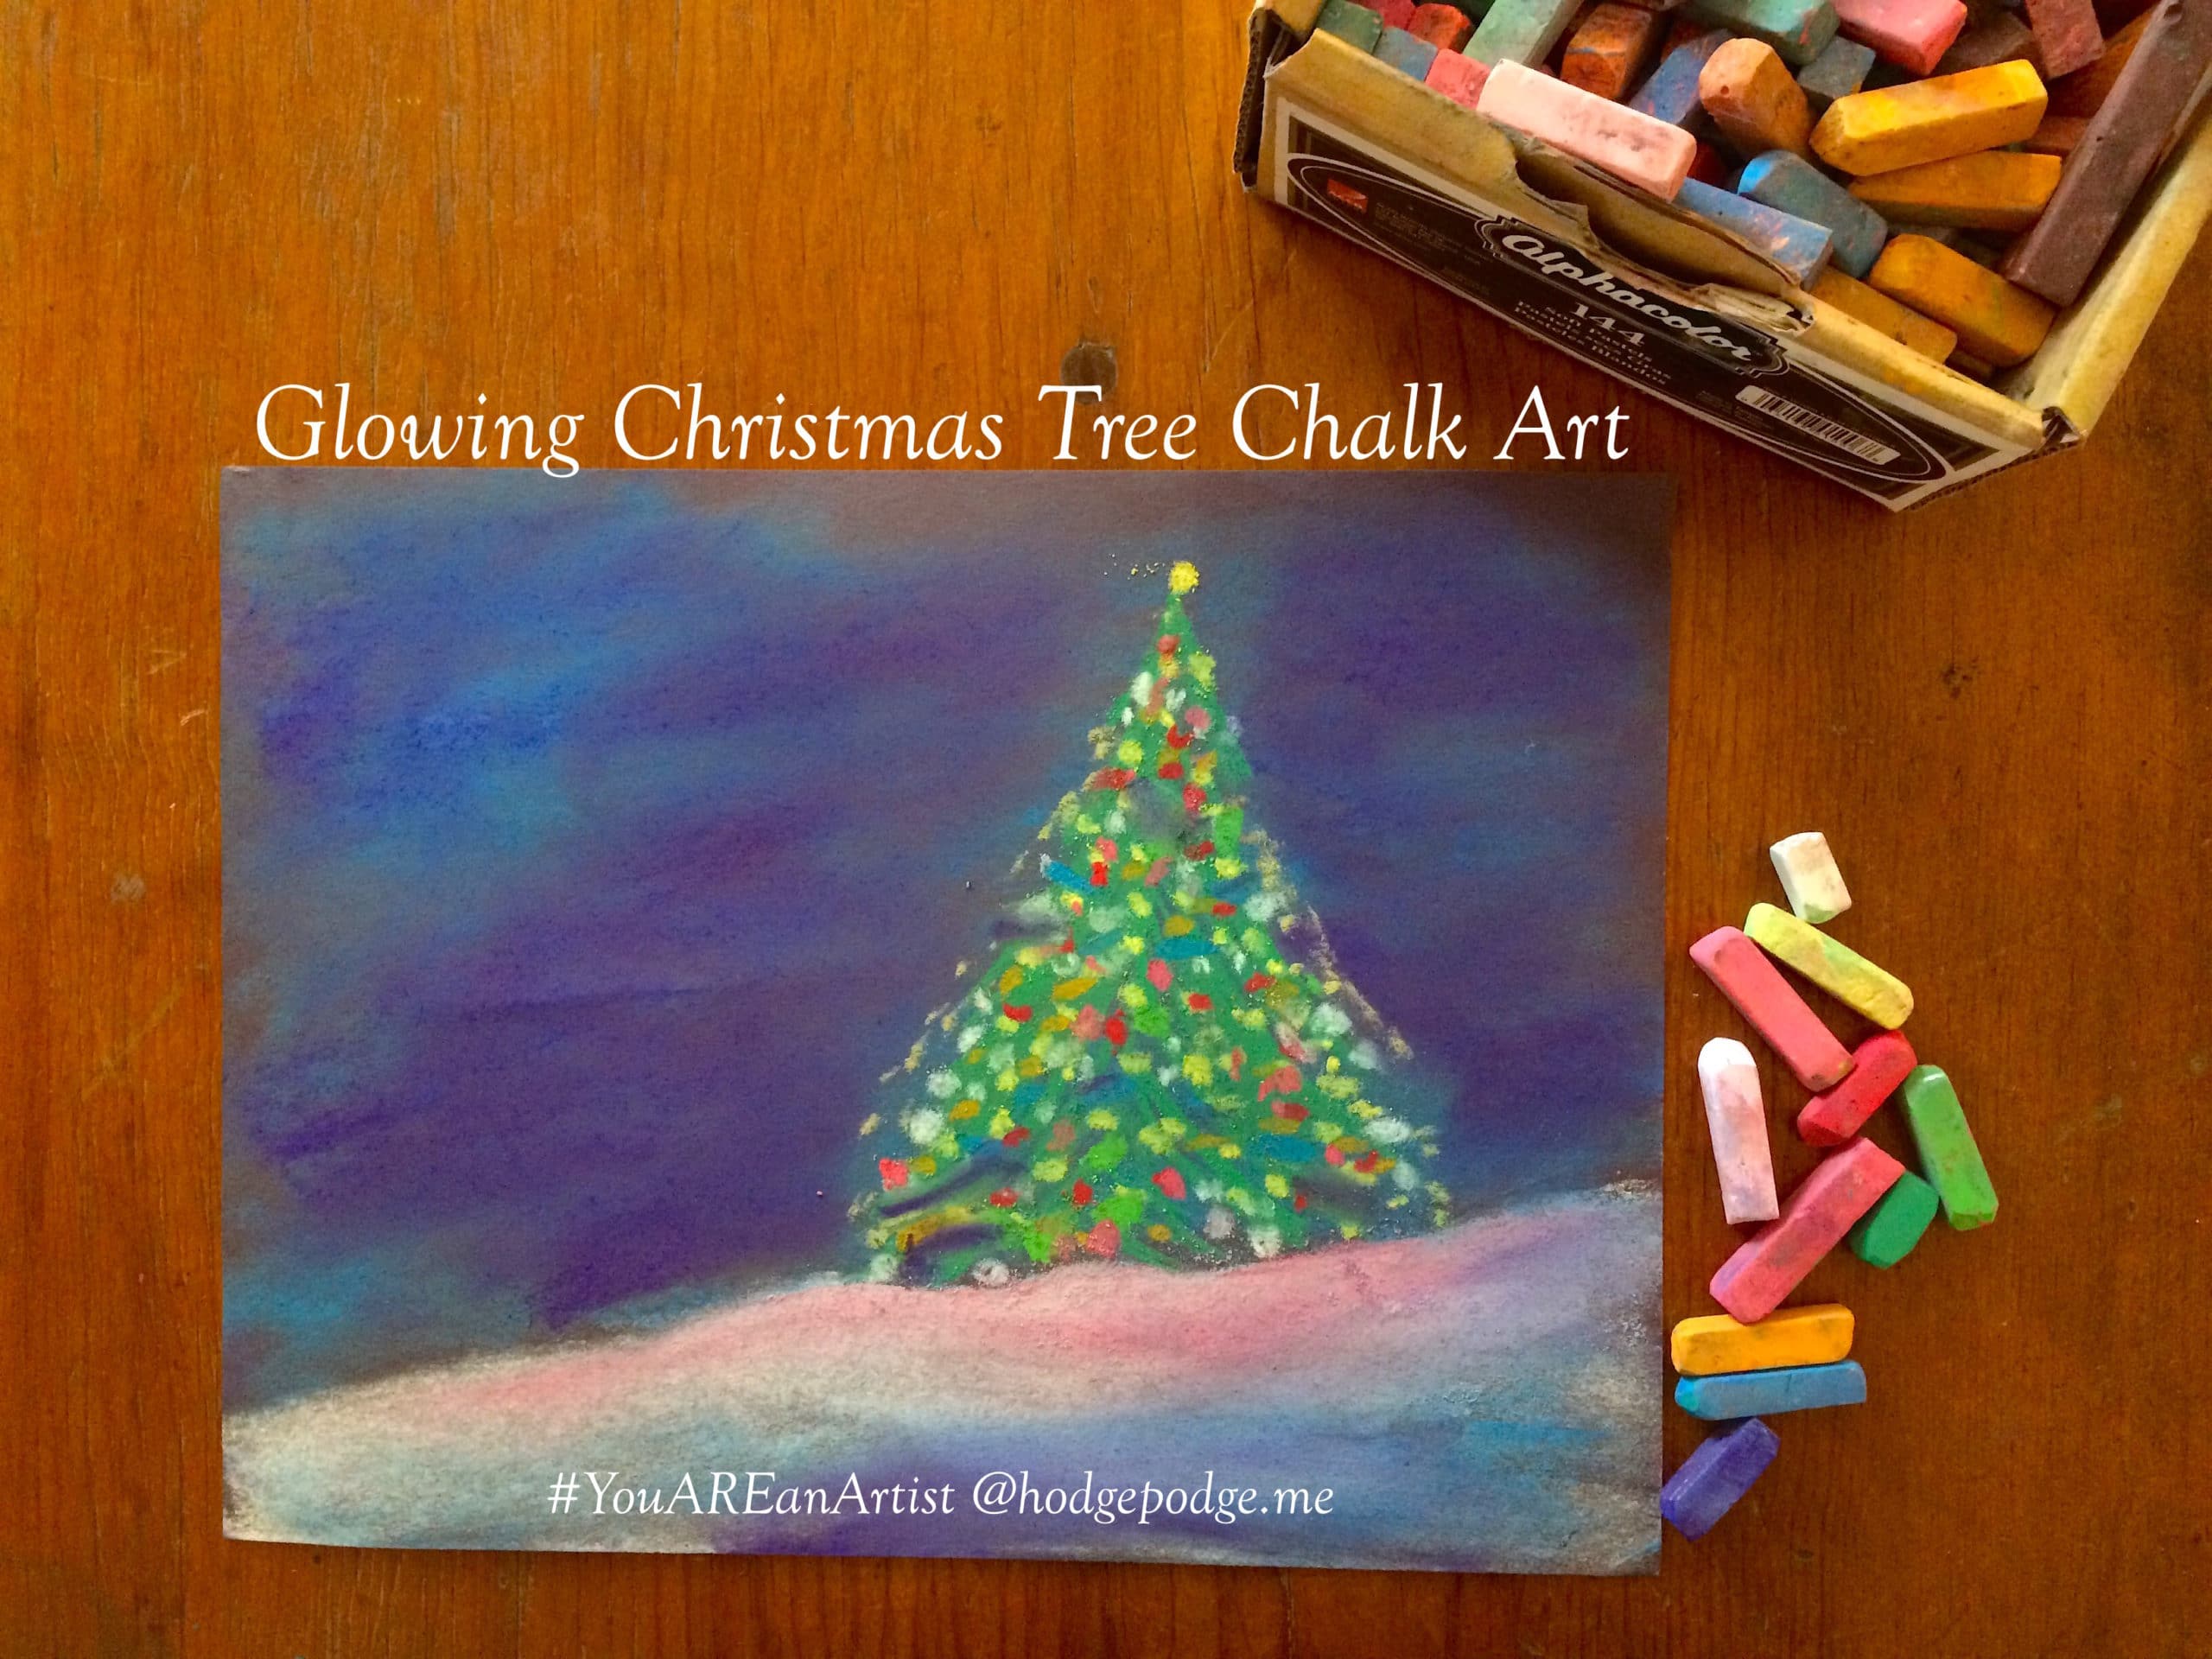 Enjoy a glowing Christmas tree chalk art tutorial and make a dreamy Christmas scene with your artists. The perfect art project to celebrate the season.